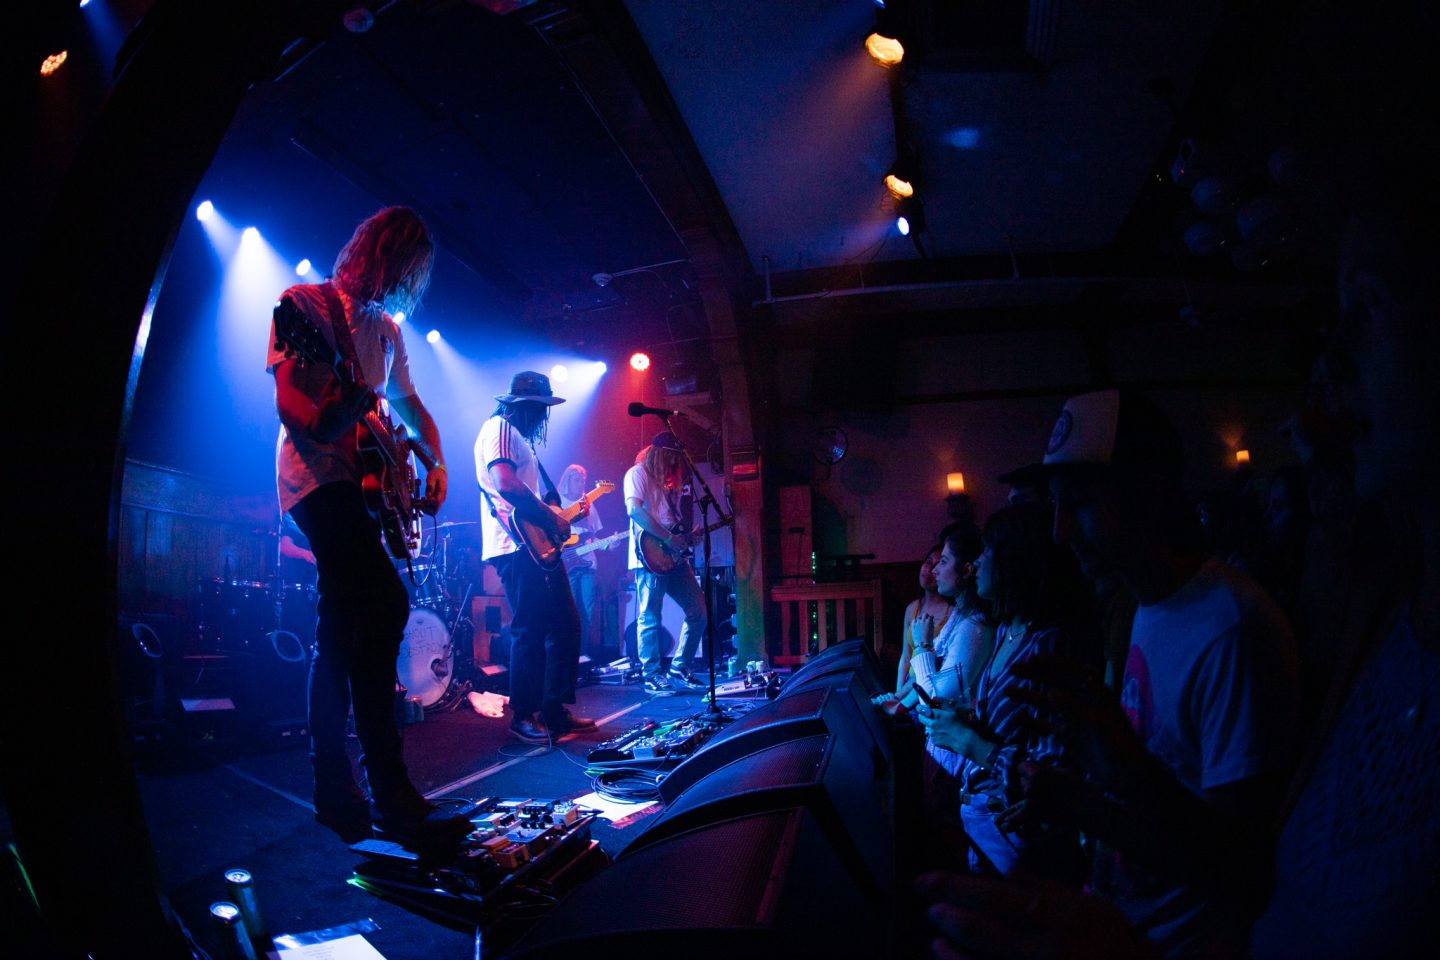 Ocean Alley at Schubas by Liina Raud Photography